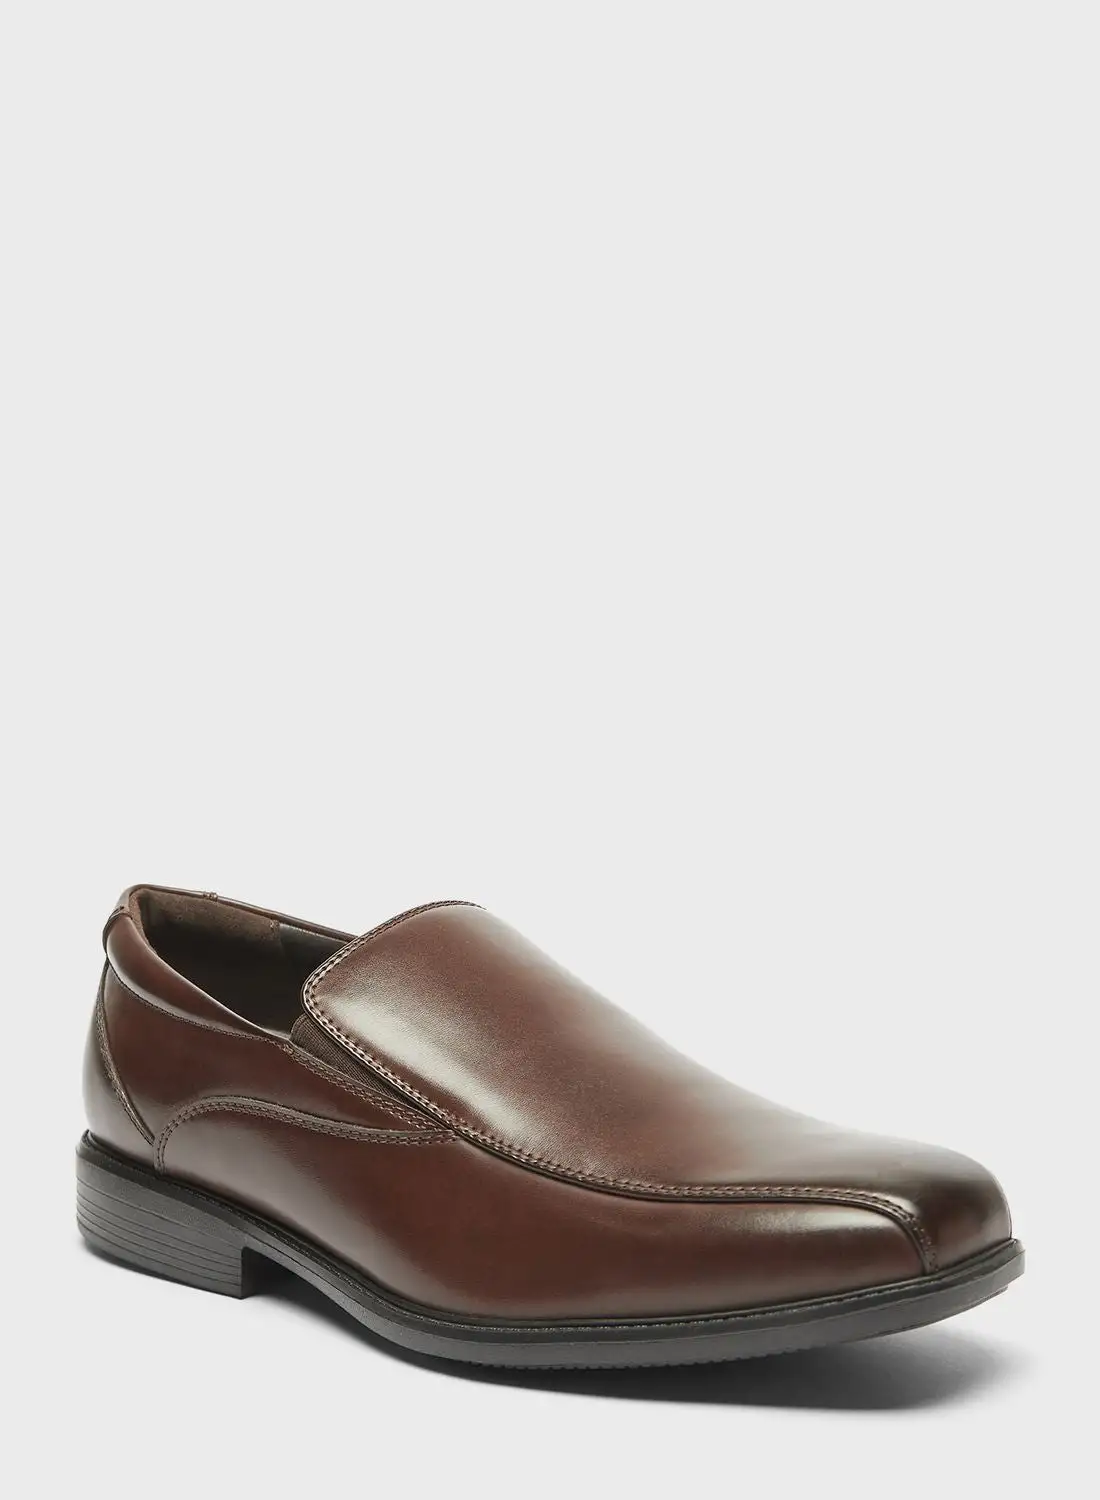 LBL by Shoexpress Formal Slip On Shoes